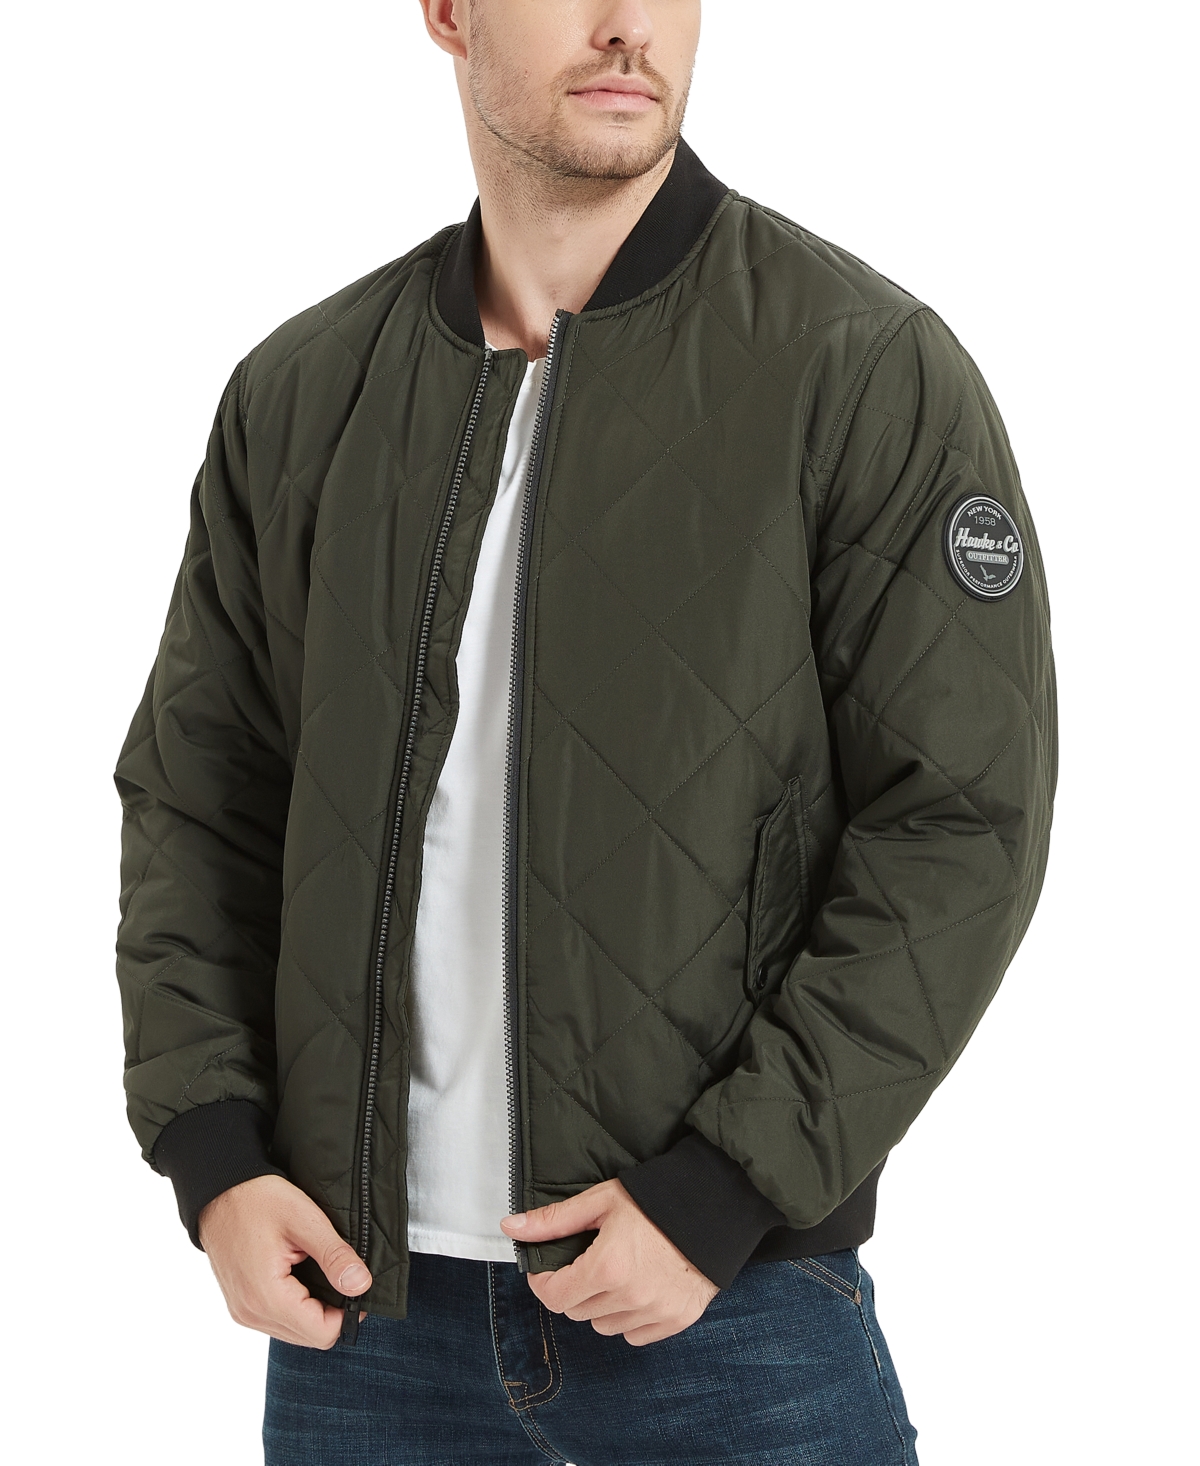 Men's Diamond Quilted Bomber Jacket - Loden